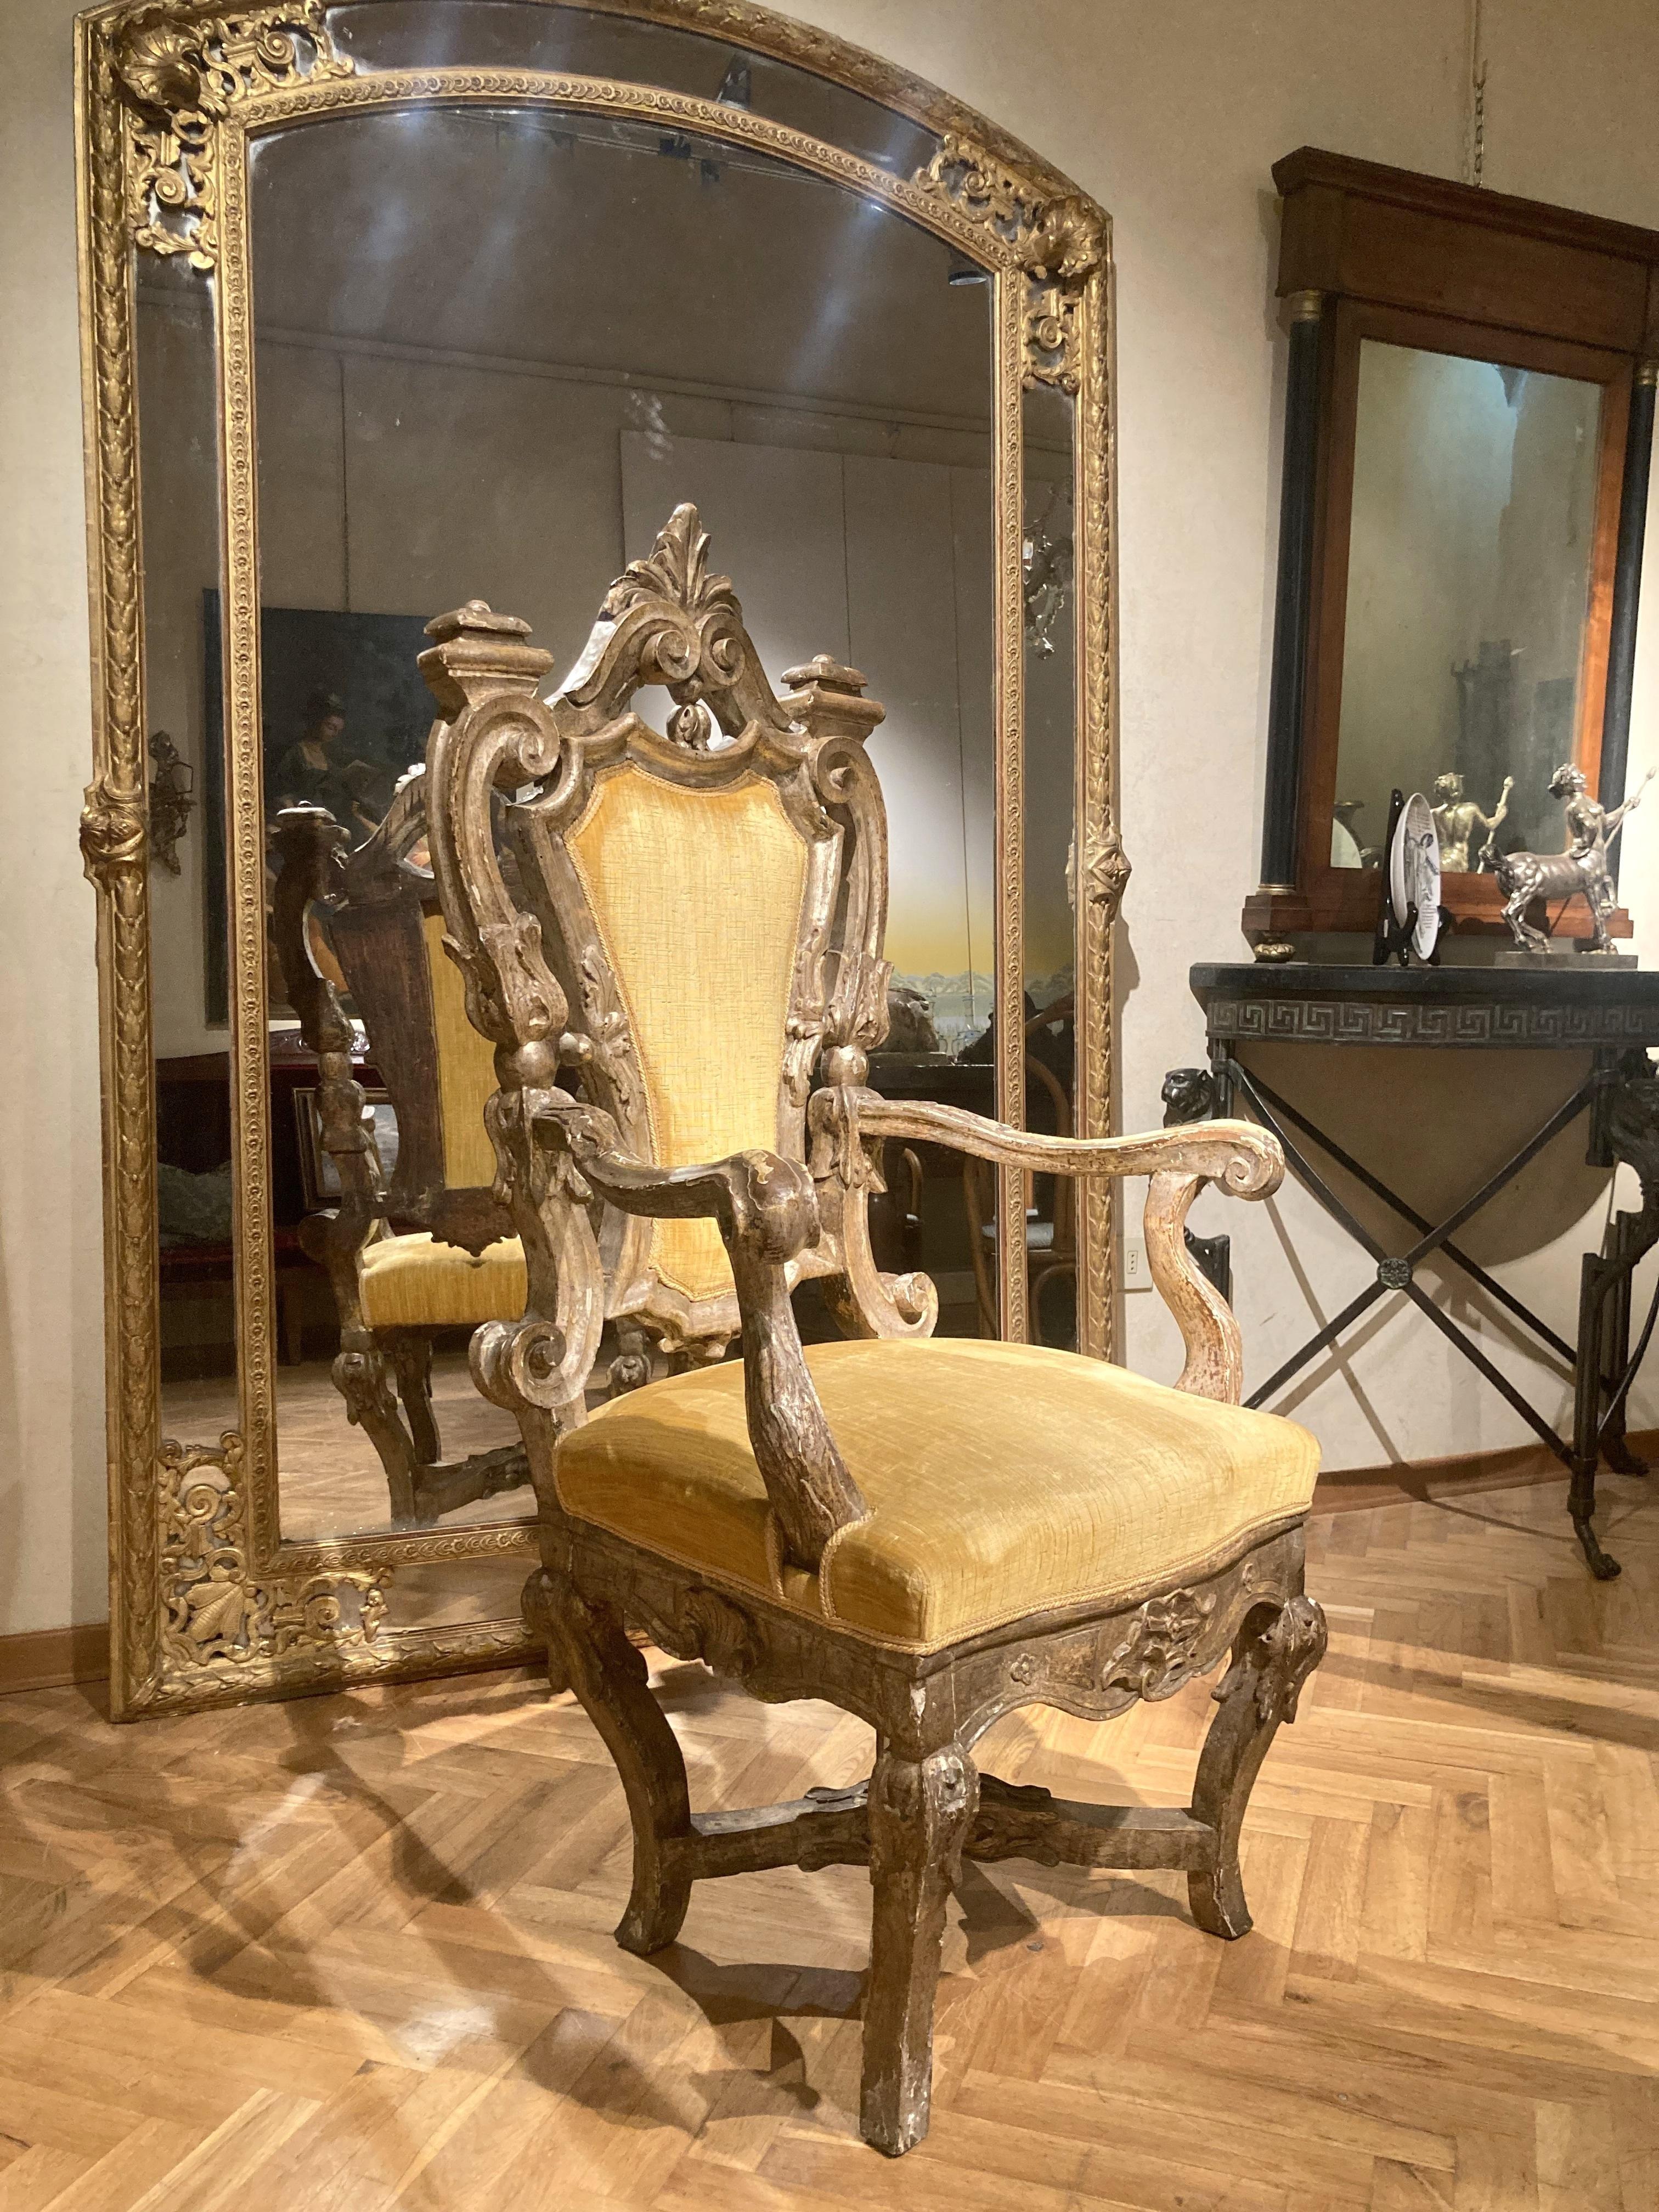 Hand-Carved Italian Baroque Silver Mecca Giltwood Throne Armchair, Rome 17th Century For Sale